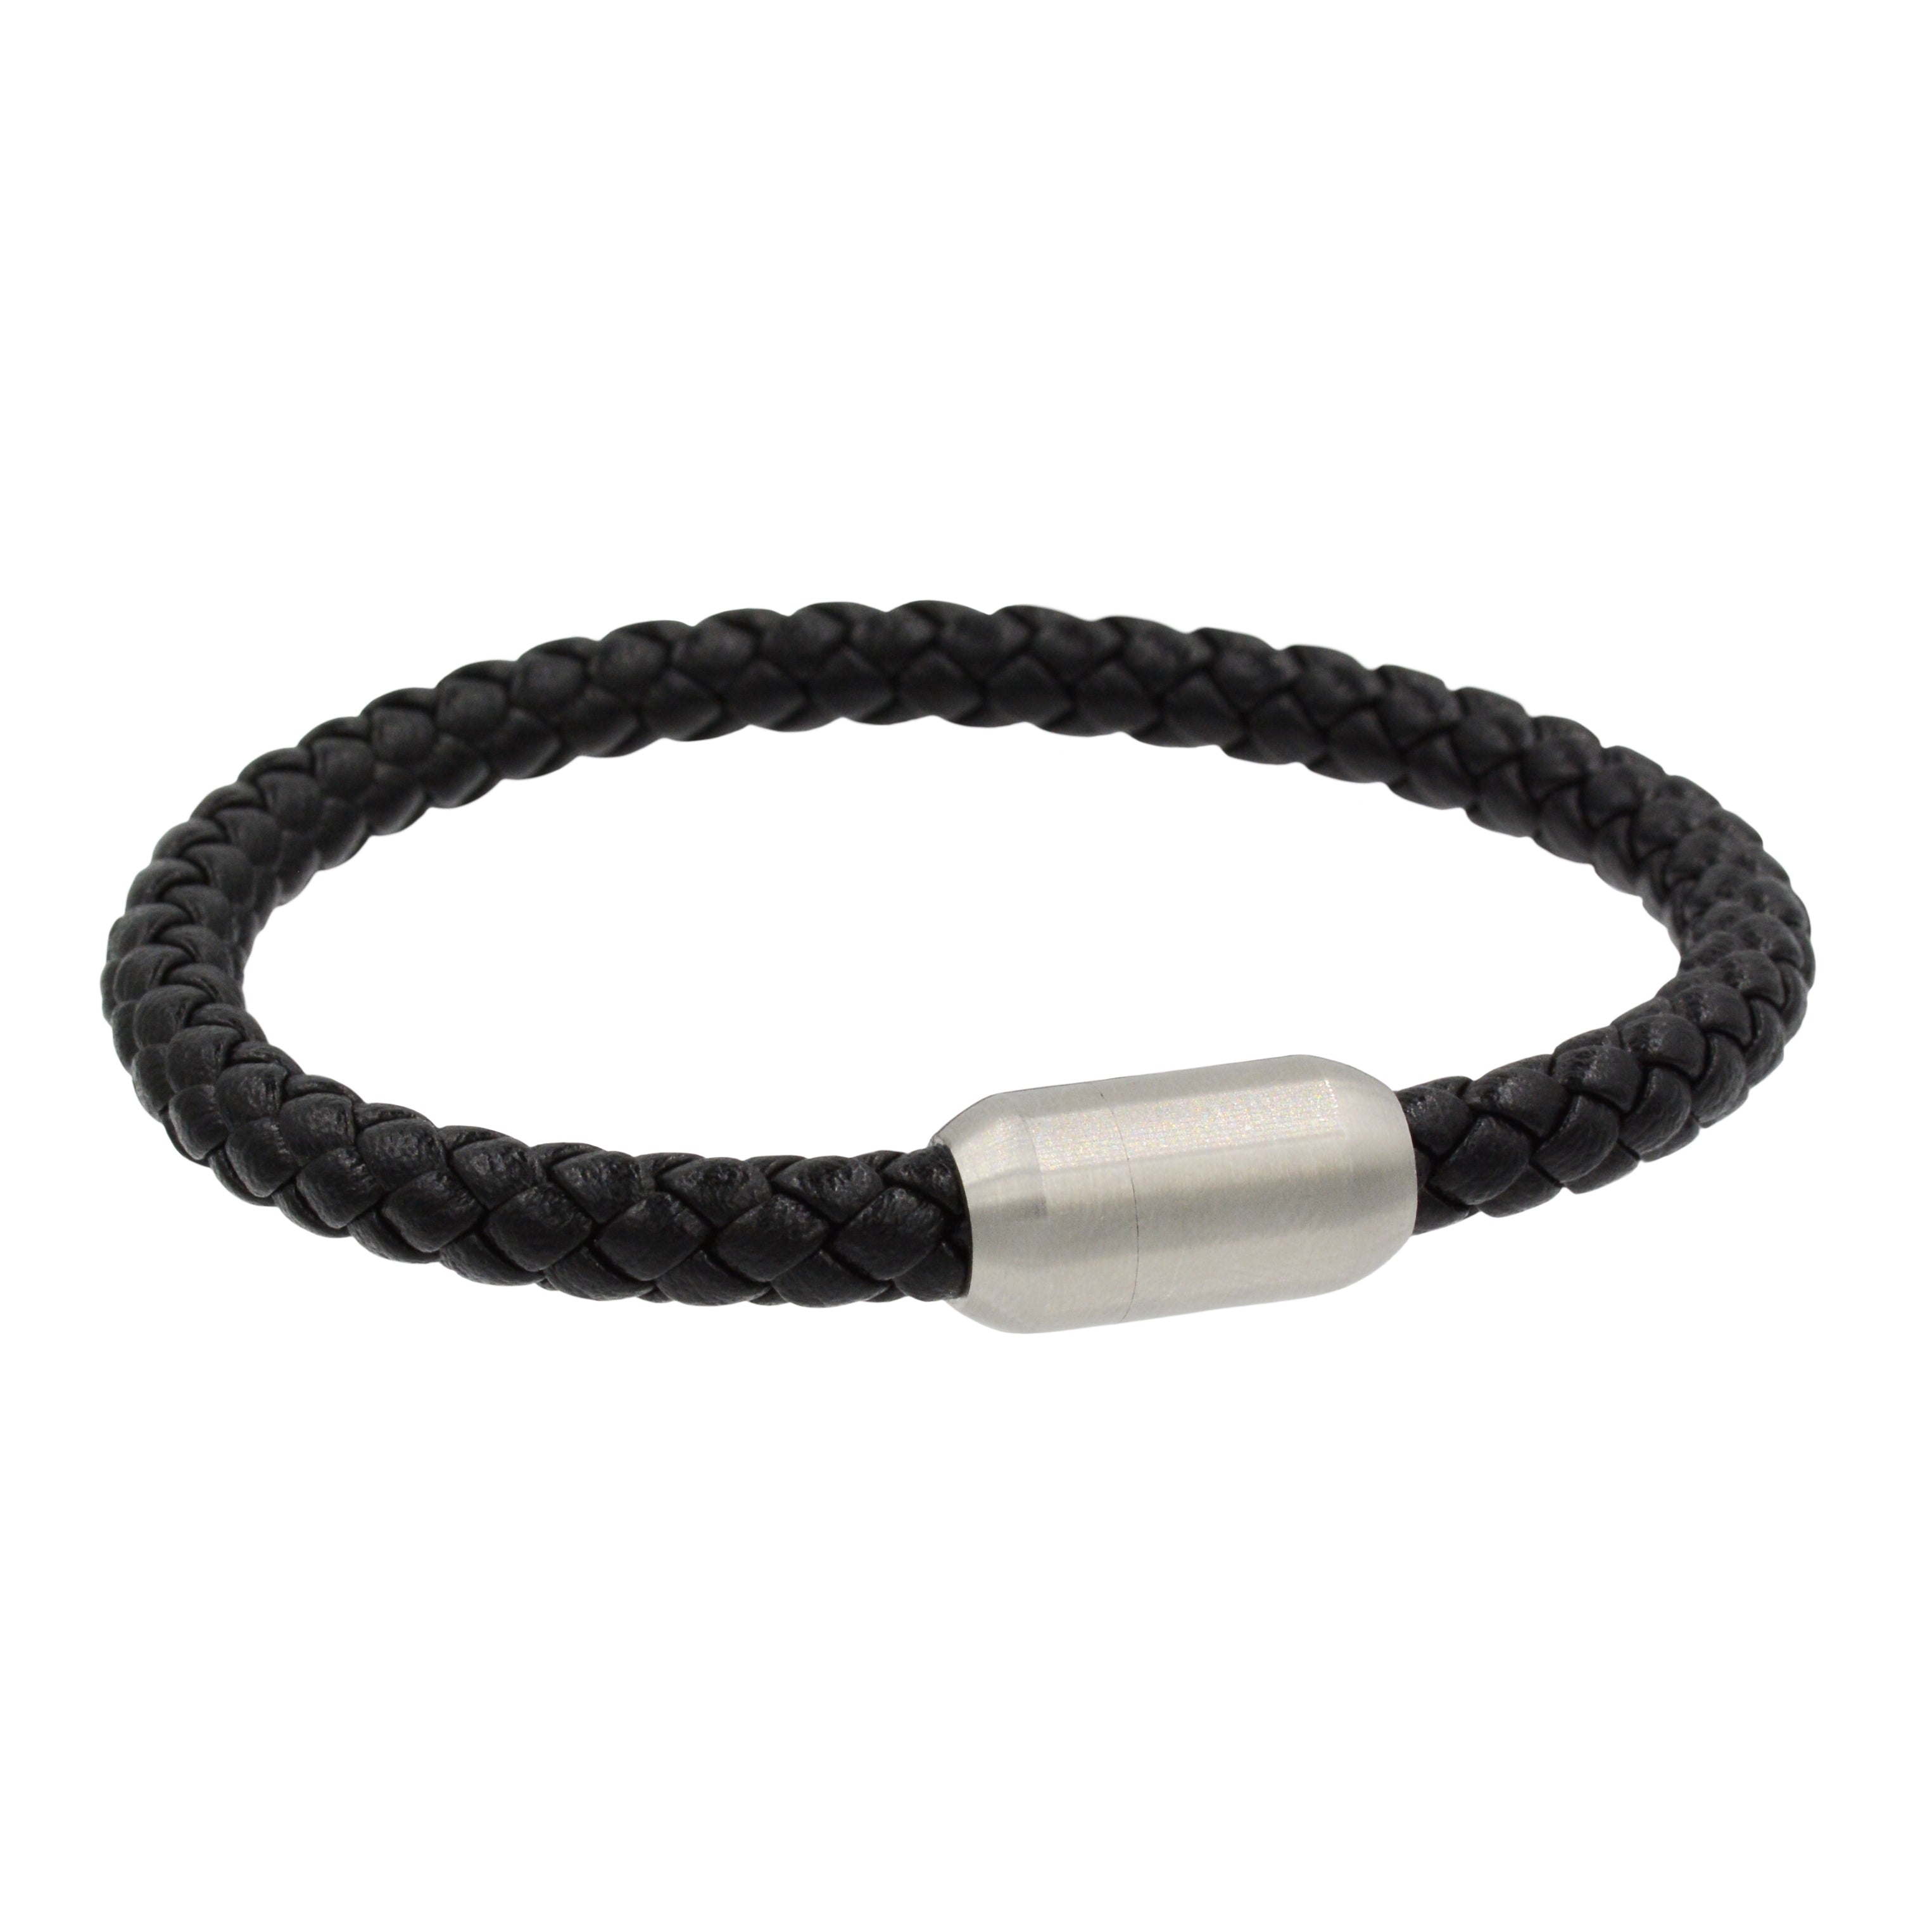 Men's Crucible Brown Twine Stainless Steel Accents Woven Braided Leather  Bangle Bracelet (12mm) - Black (8.5